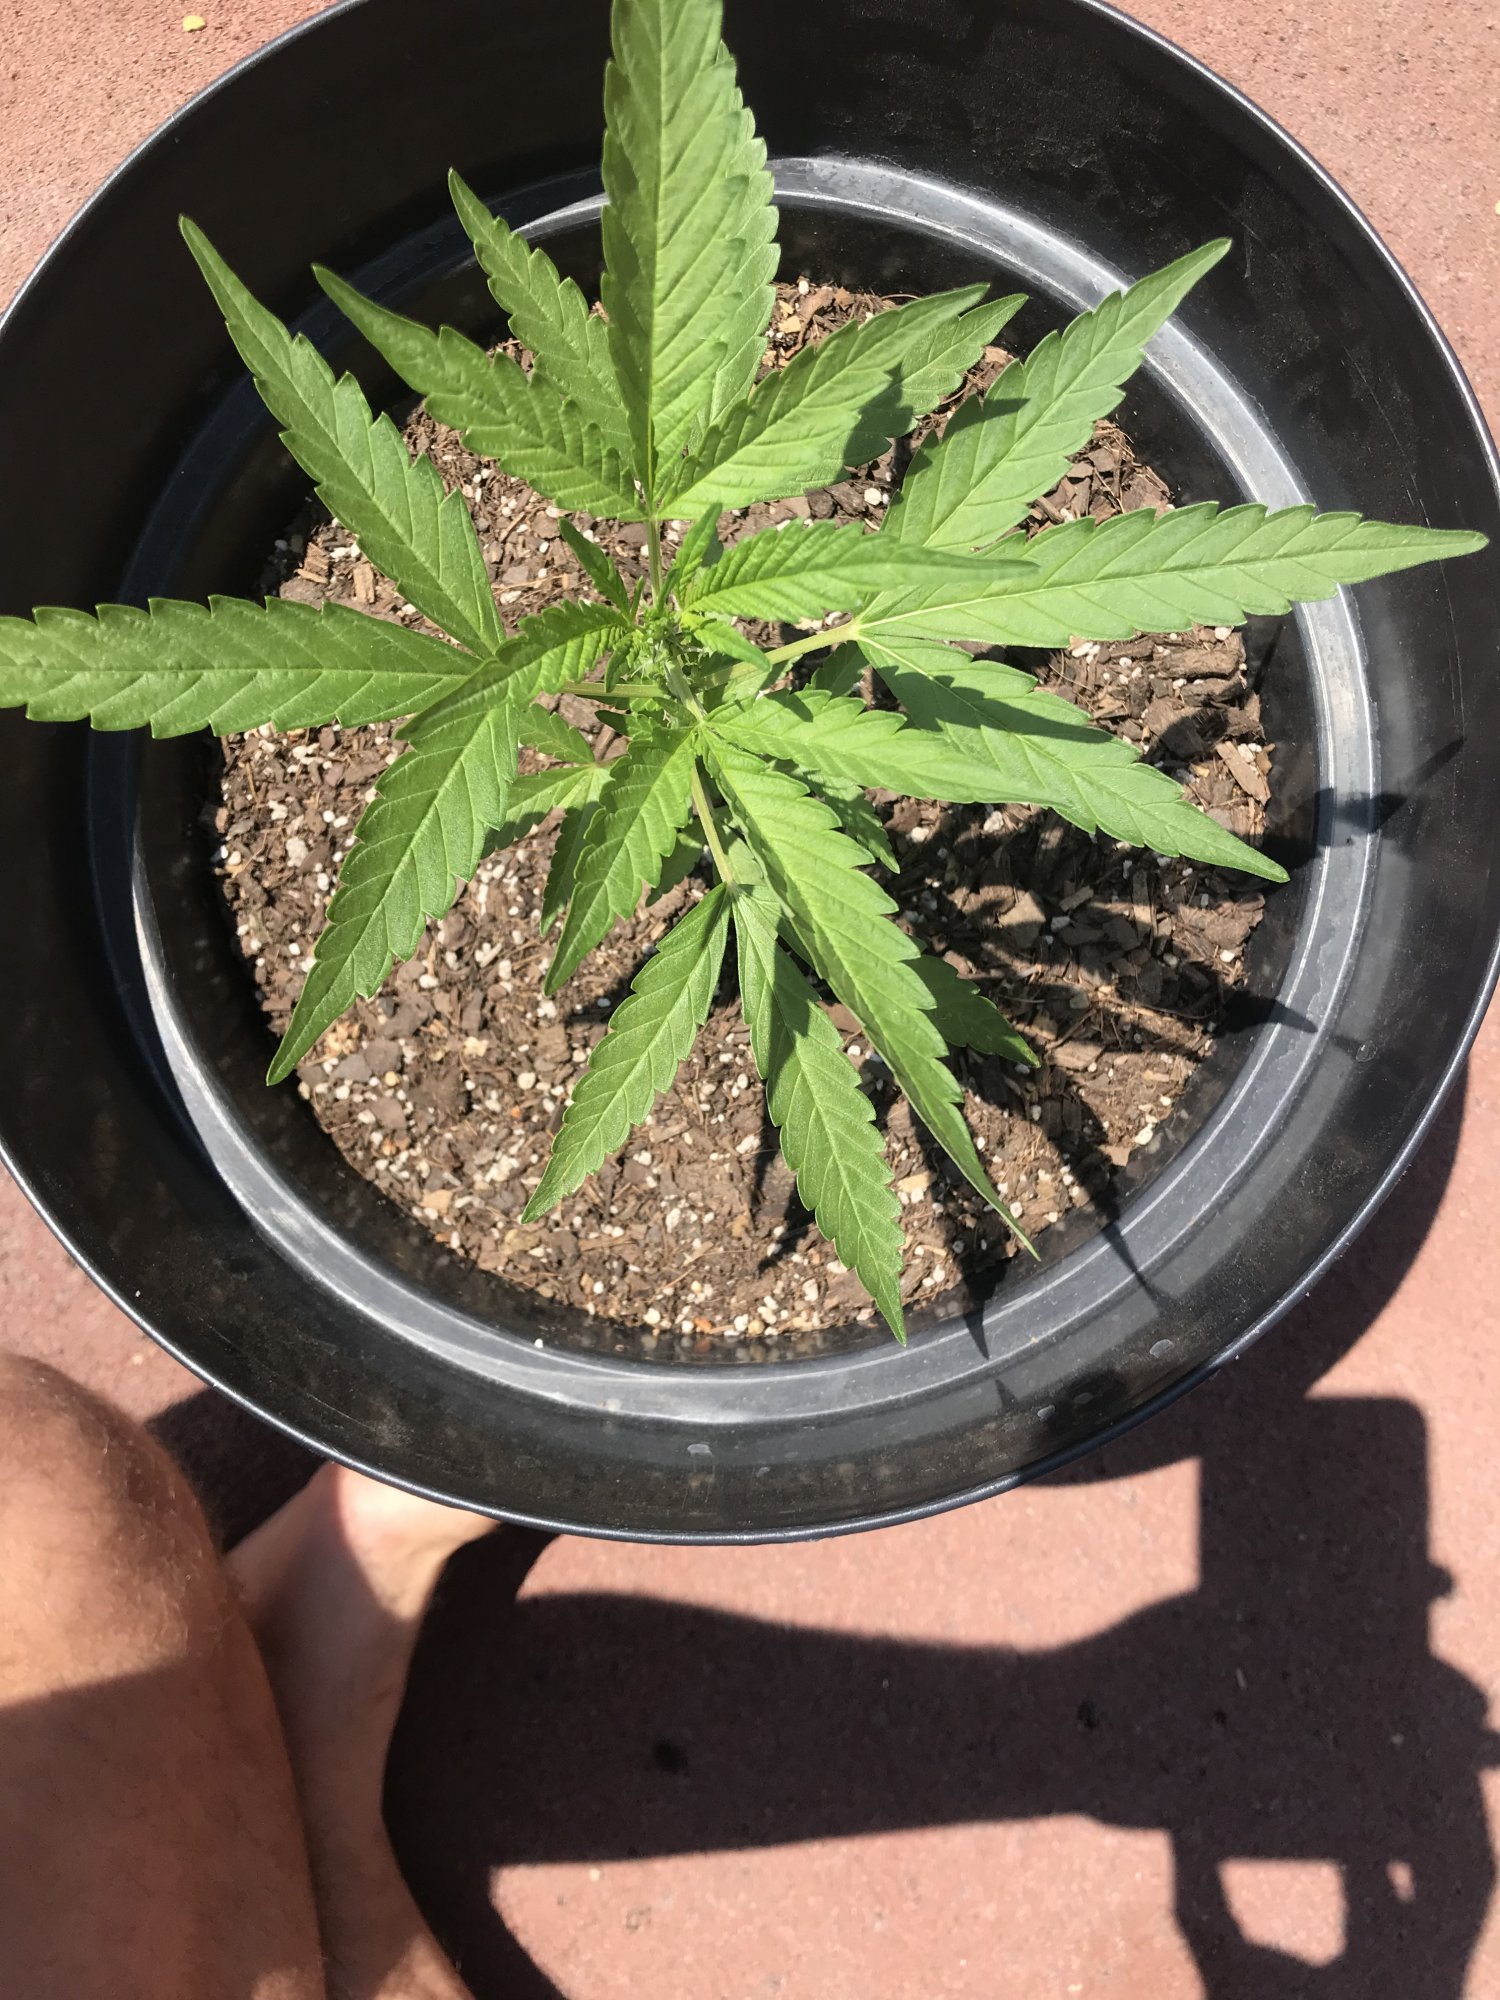 First time grower here outdoor plant preflowering in veg questions about feedingwatering